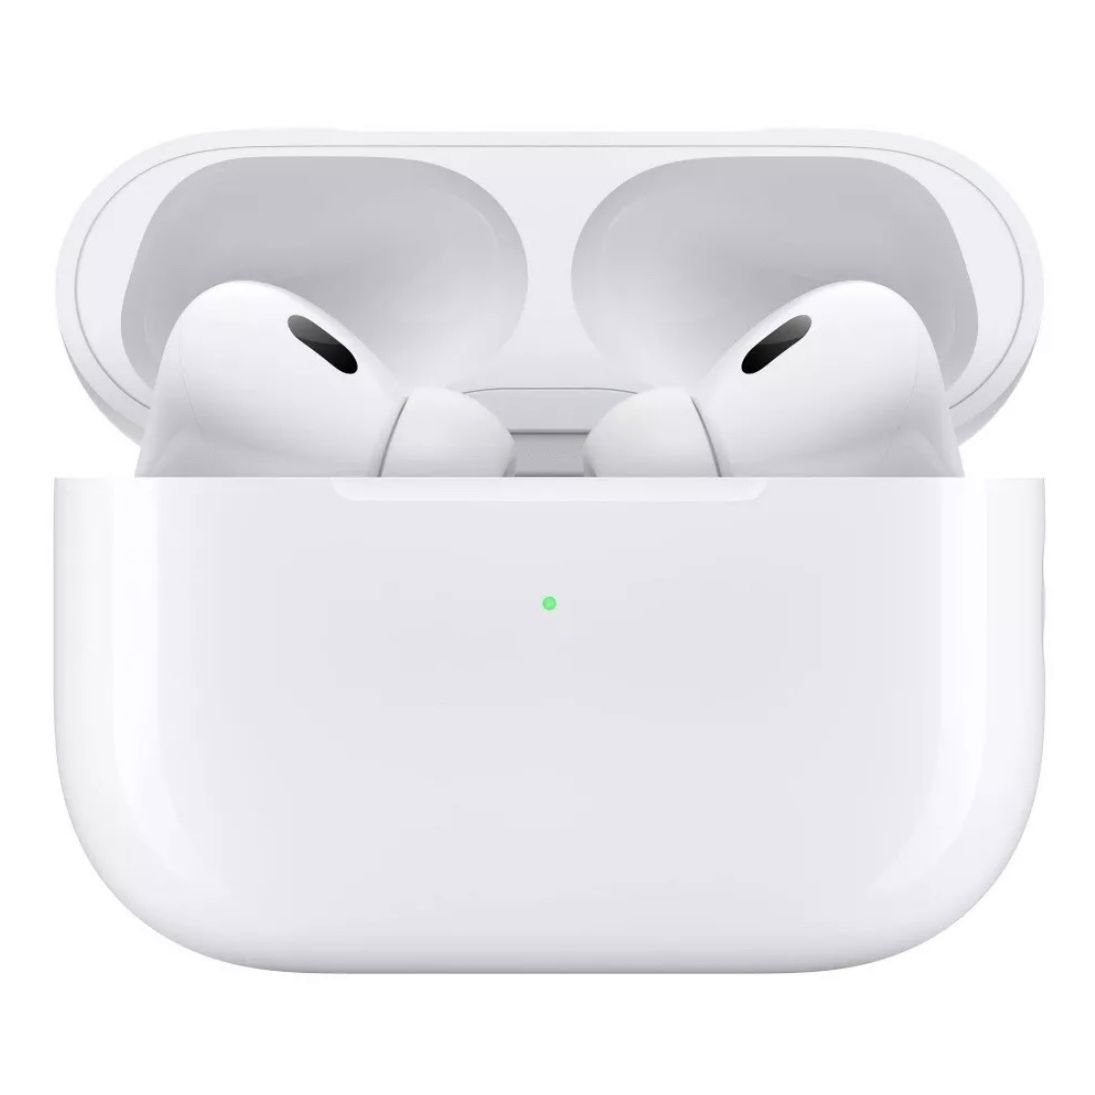 Apple AirPod Pros 2nd Generation MagSafe Charging Case (USB-C)